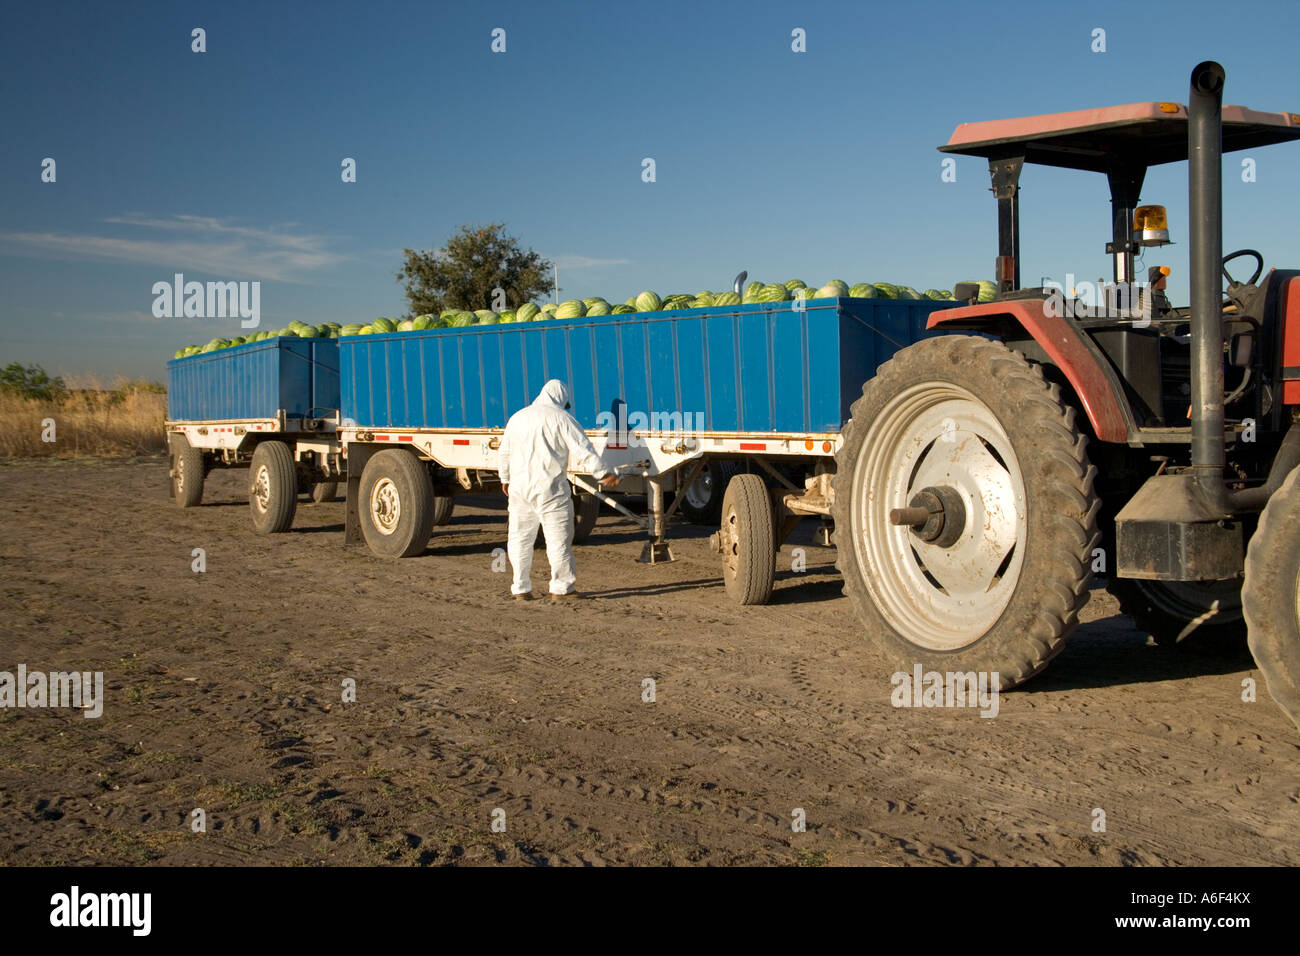 Worker securing field trailer, watermelon harvest, Stock Photo